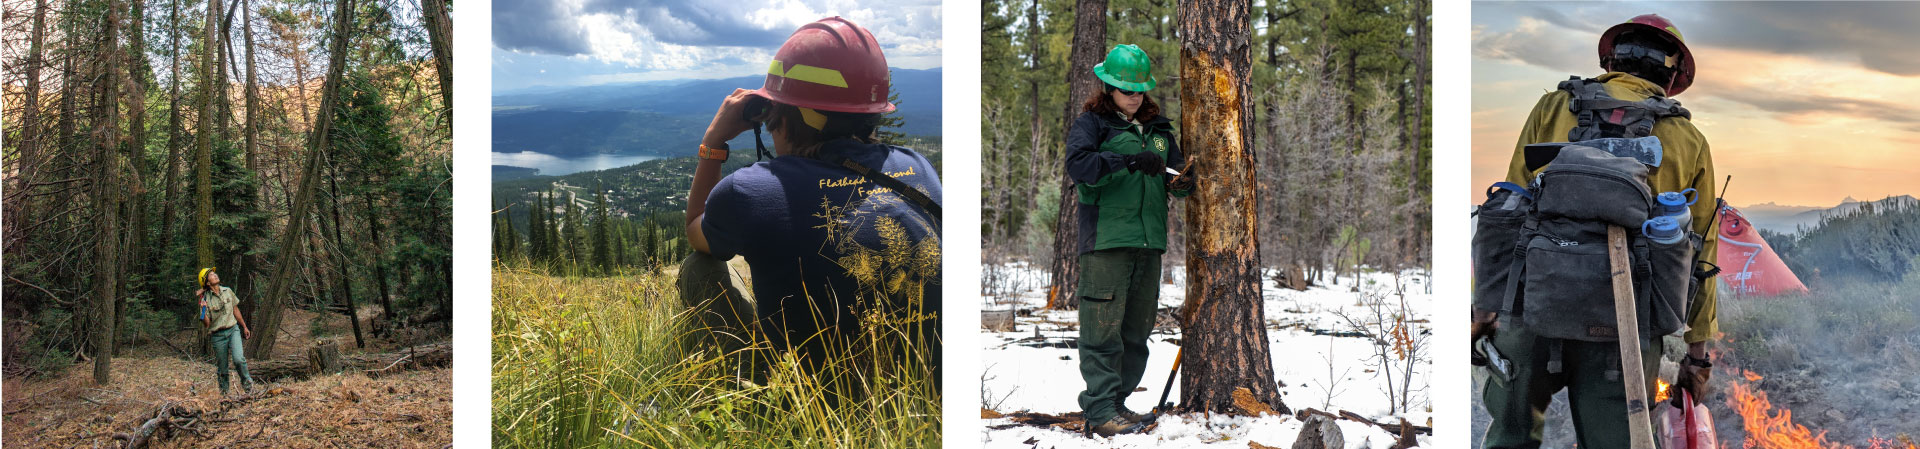 pictures of a person standing in a forest, a person on a hill, person stand by a tree, and a wildland firefighter